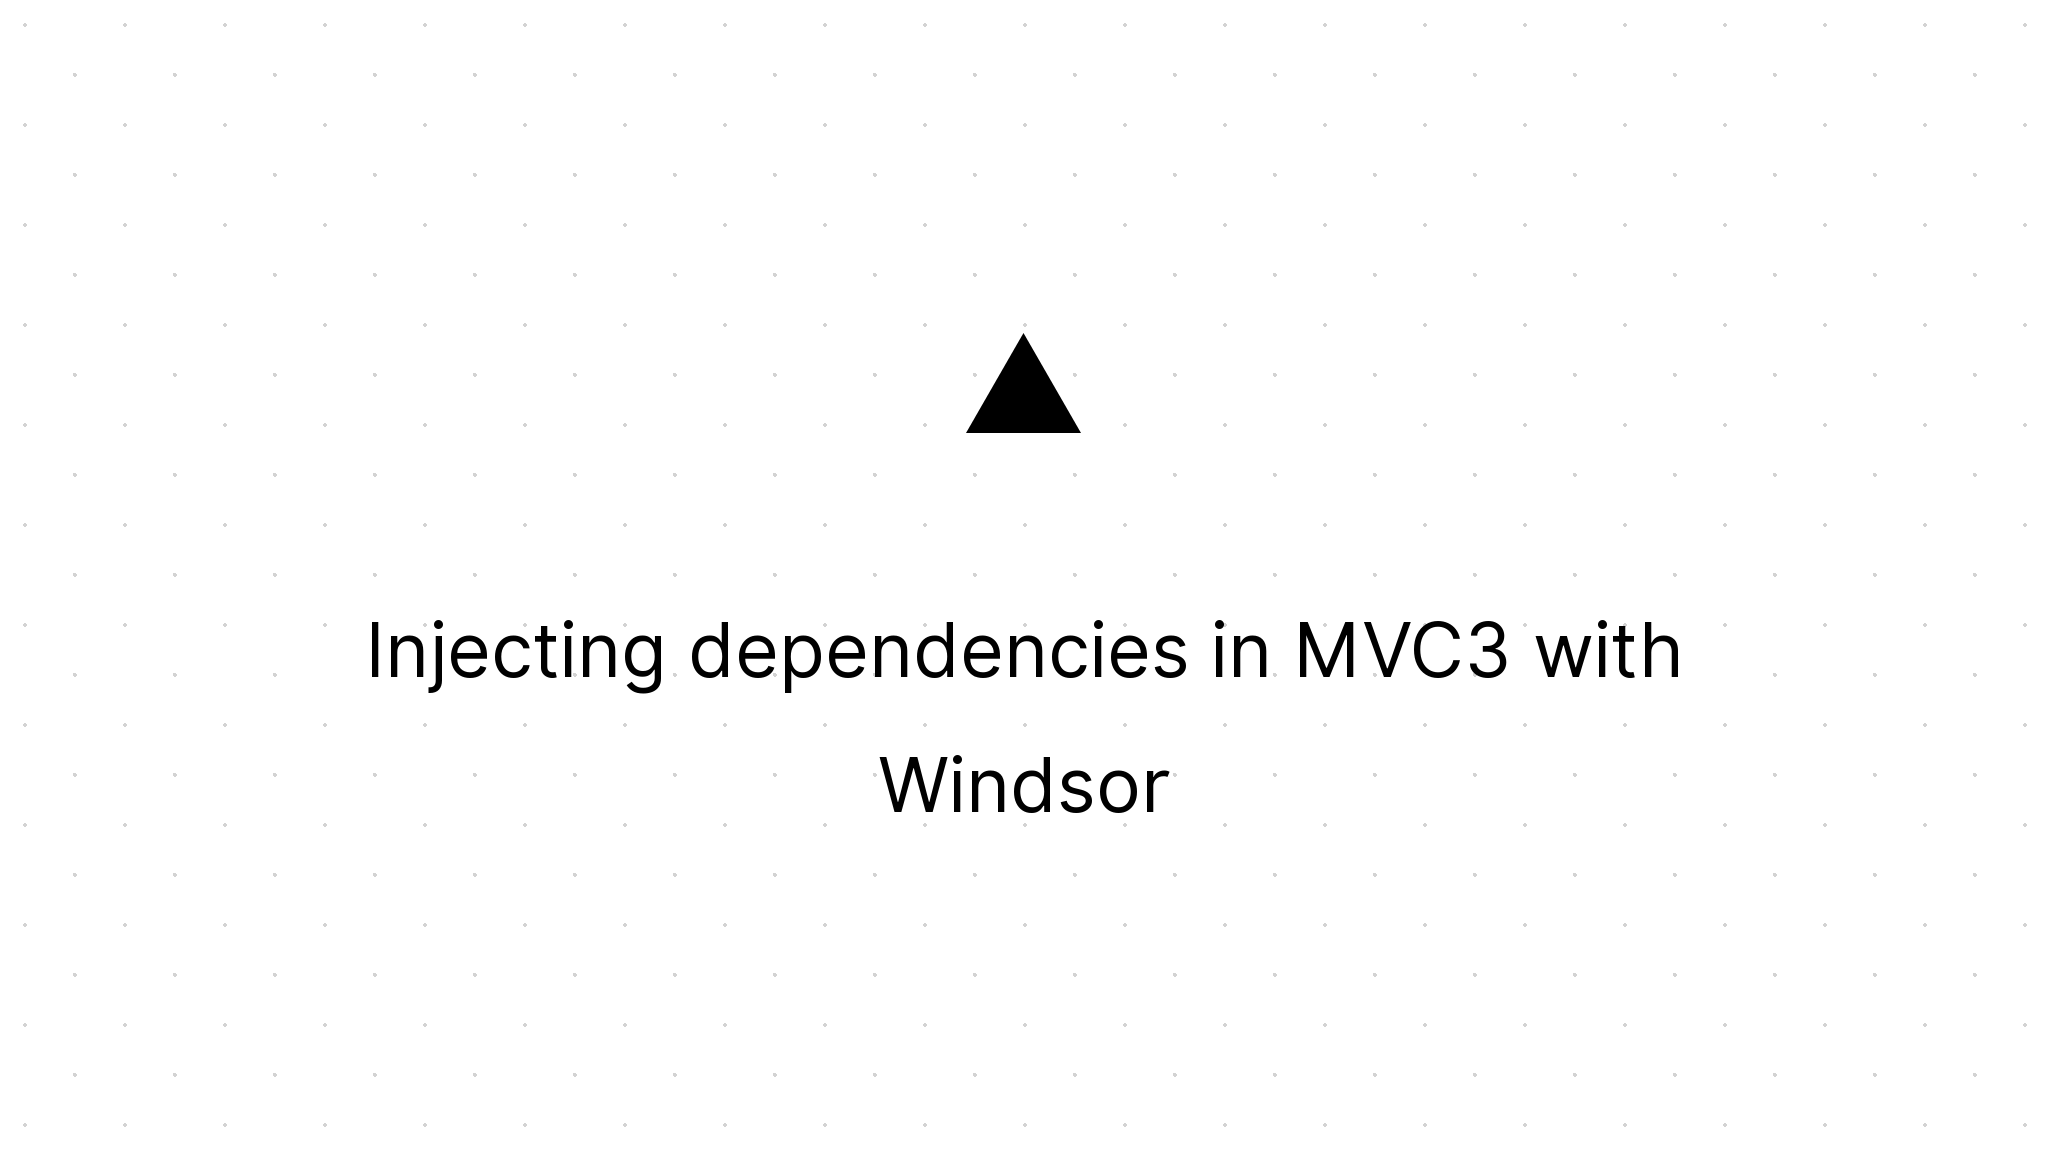 Cover Image for Injecting dependencies in MVC3 with Windsor